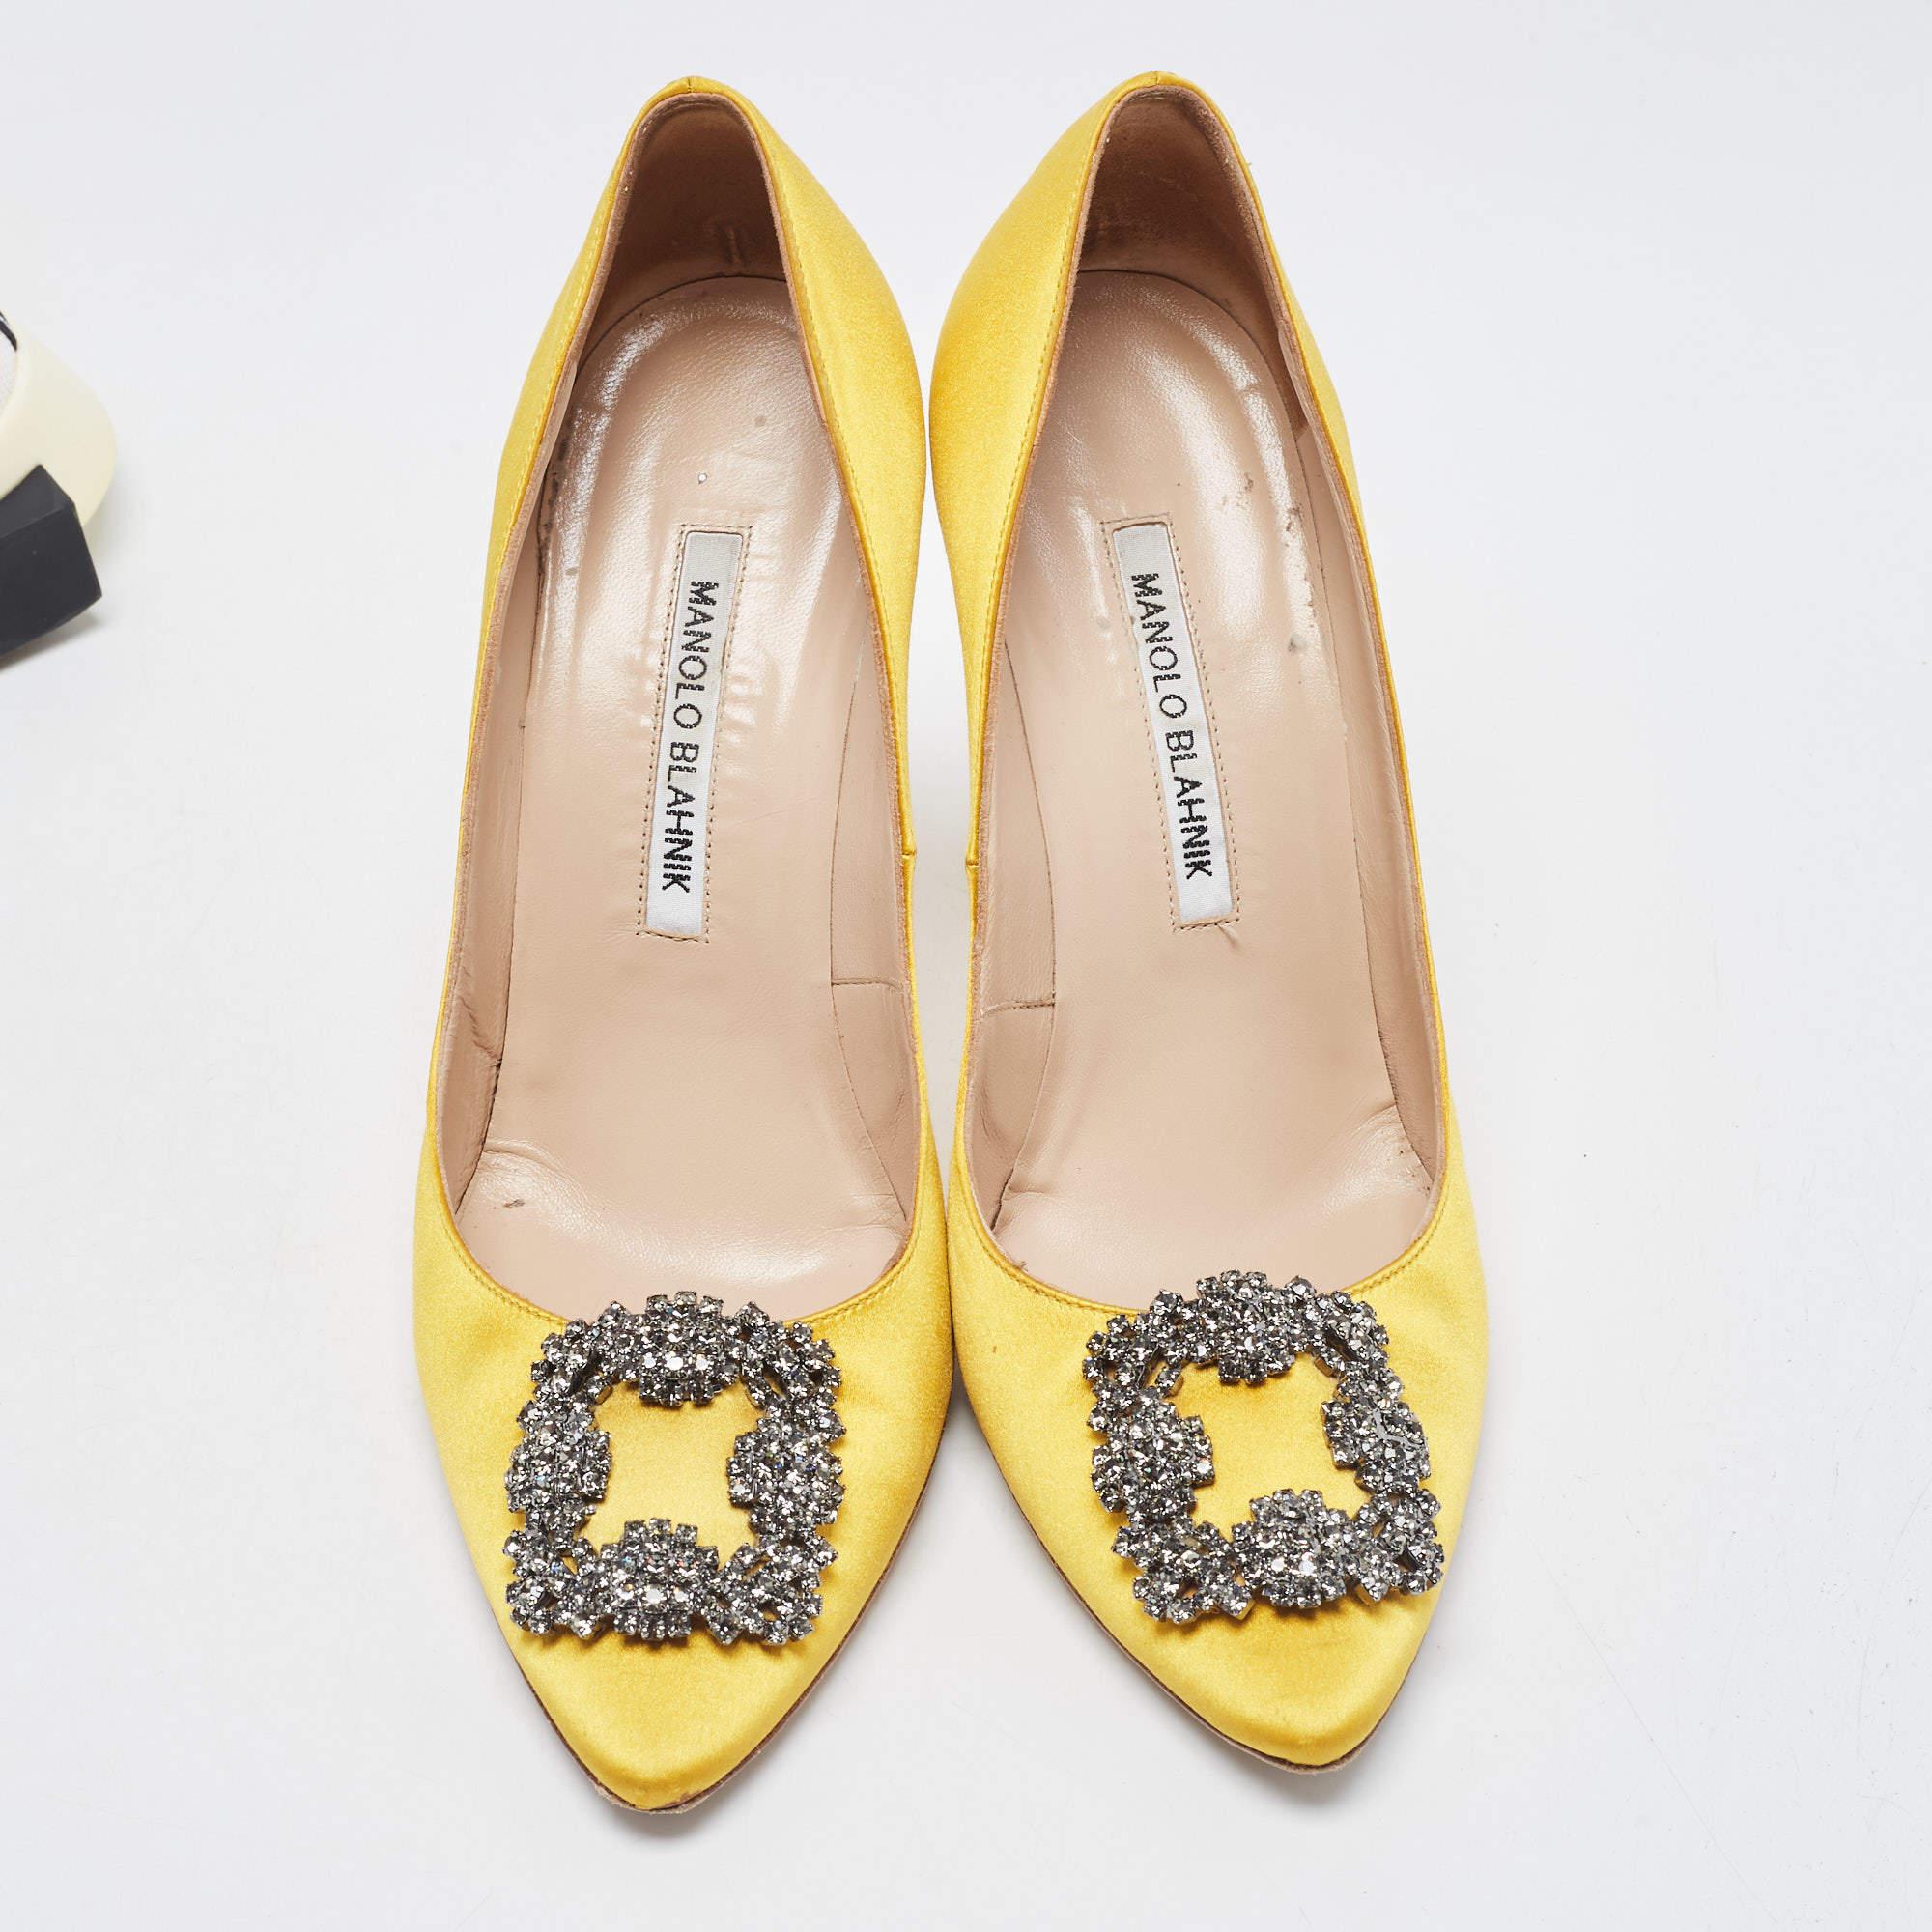 Exhibit an elegant style with this pair of pumps. These Manolo Blahnik shoes for women are crafted from quality materials. They are set on durable soles and sleek heels.

Includes: Original Dustbag, Original Box

